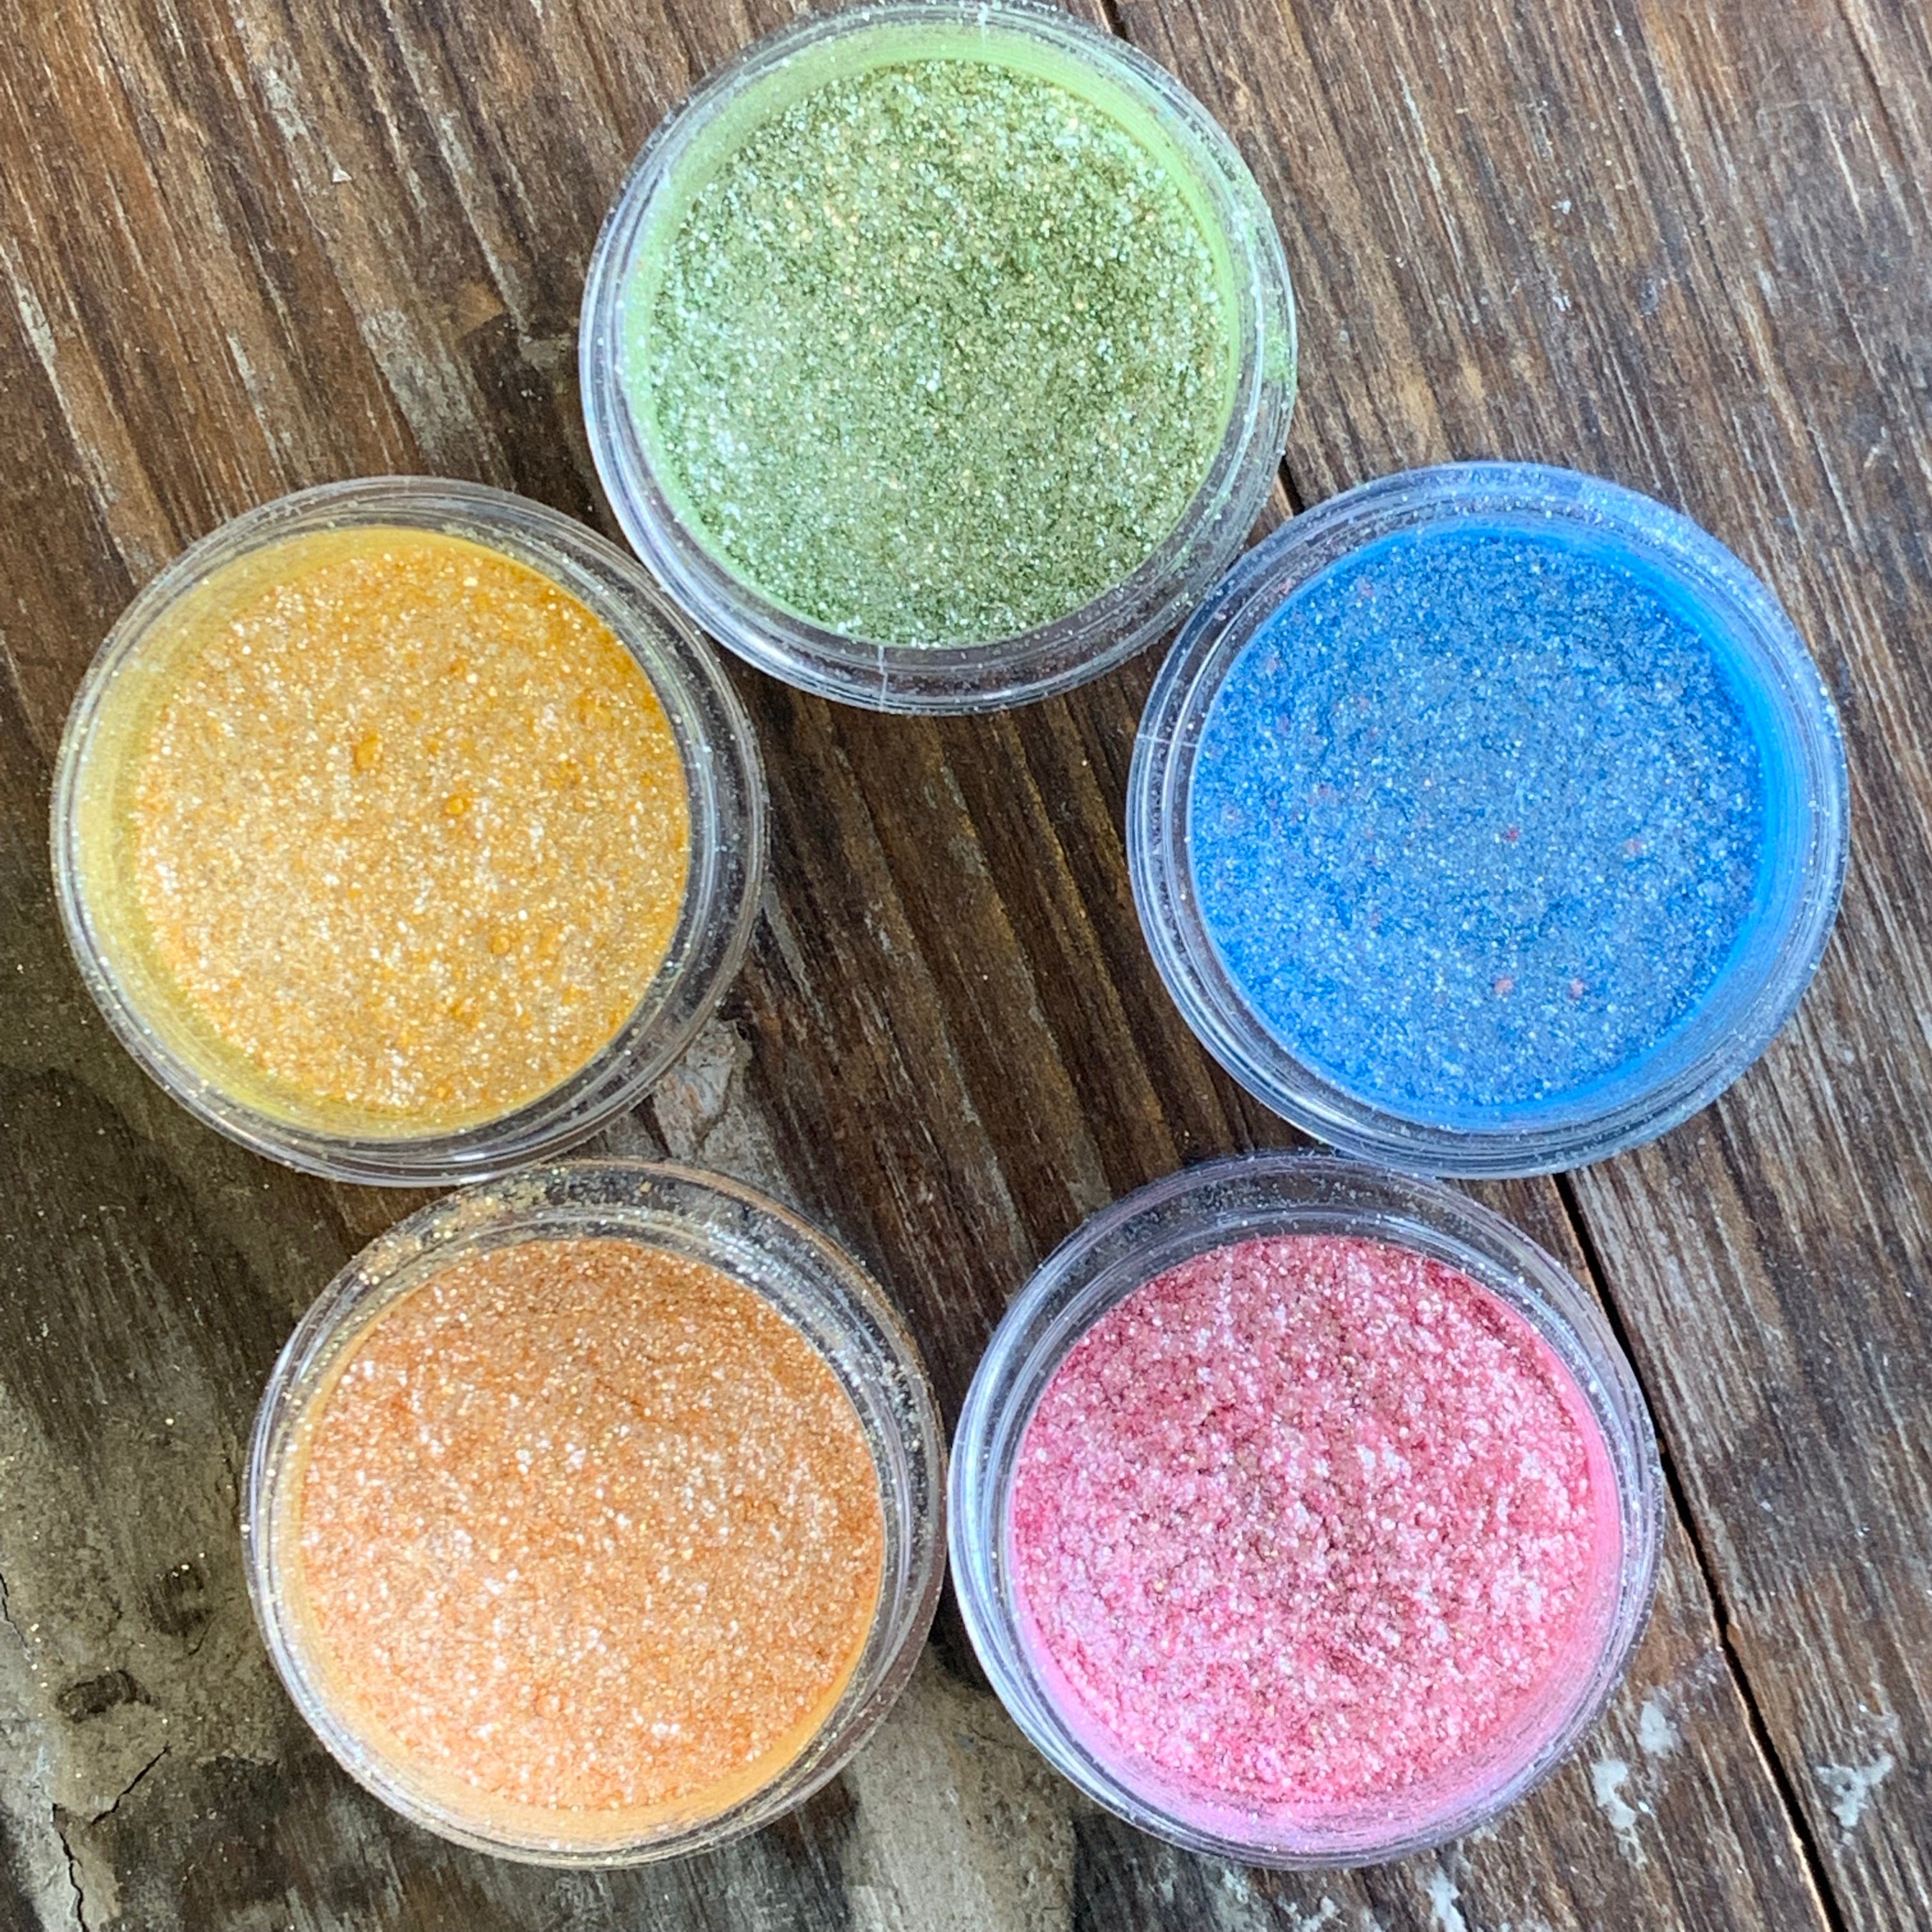 Edible Flash Dust Glitter by NFD for Adding Sparkle to Your Glass